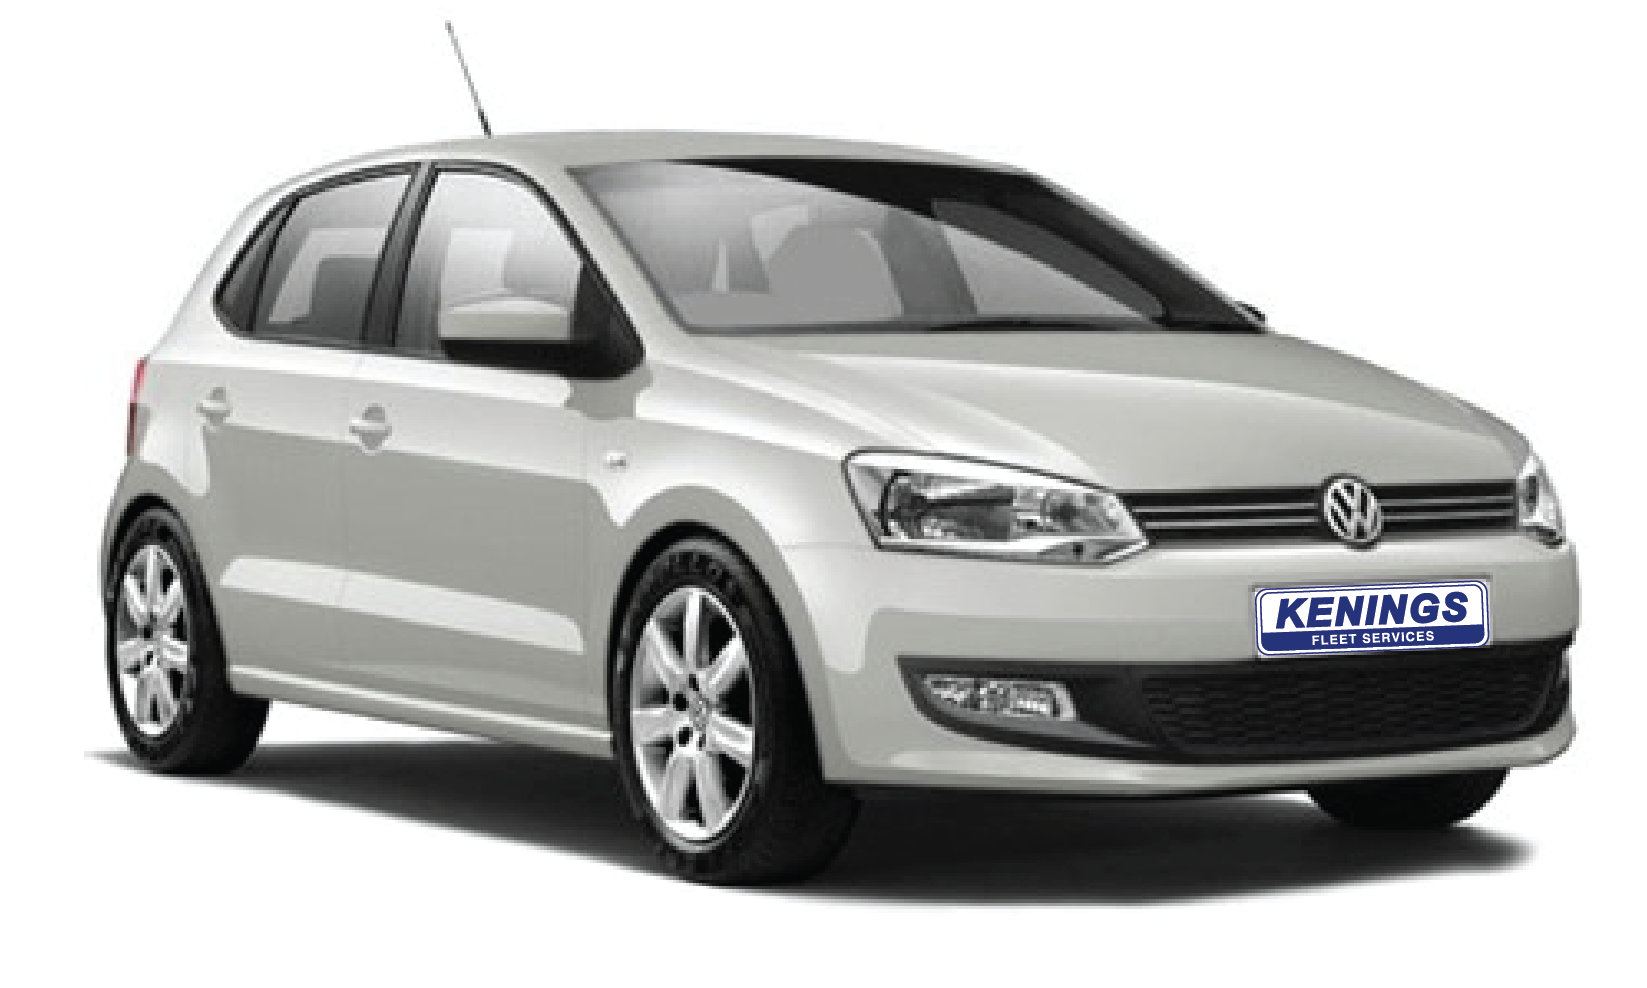 Volkswagen Polo Hatch or Similar